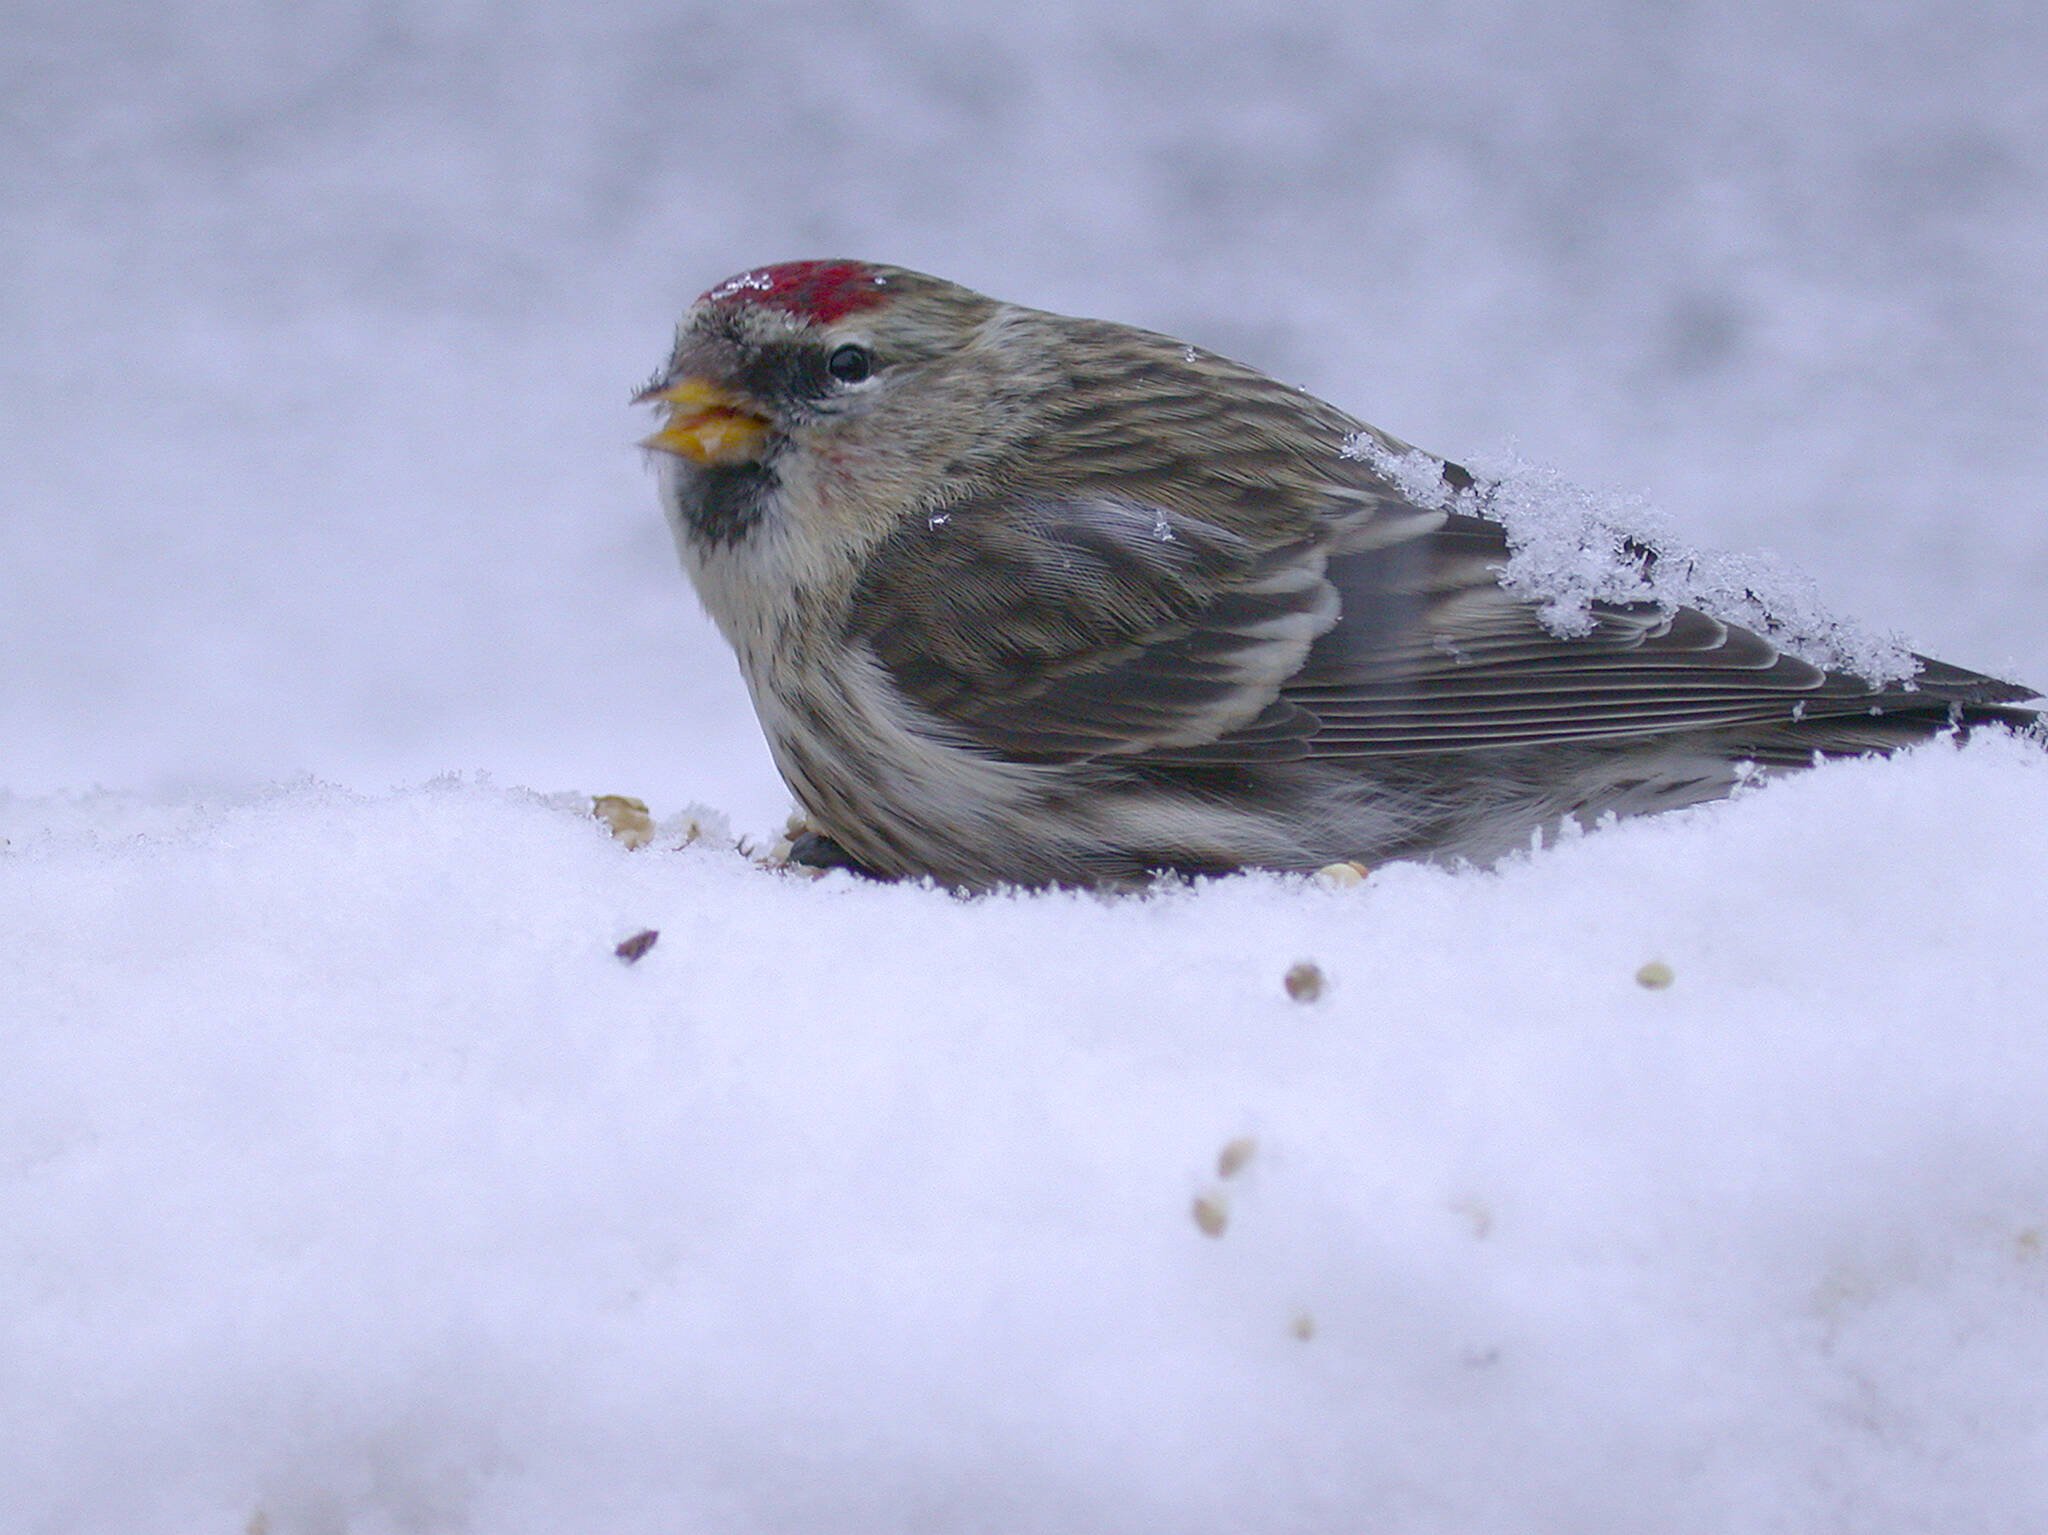 Common redpolls often visit Juneau in winter, feeding on alder seeds and visiting seed feeders.(Courtesy Photo / Bob Armstrong)